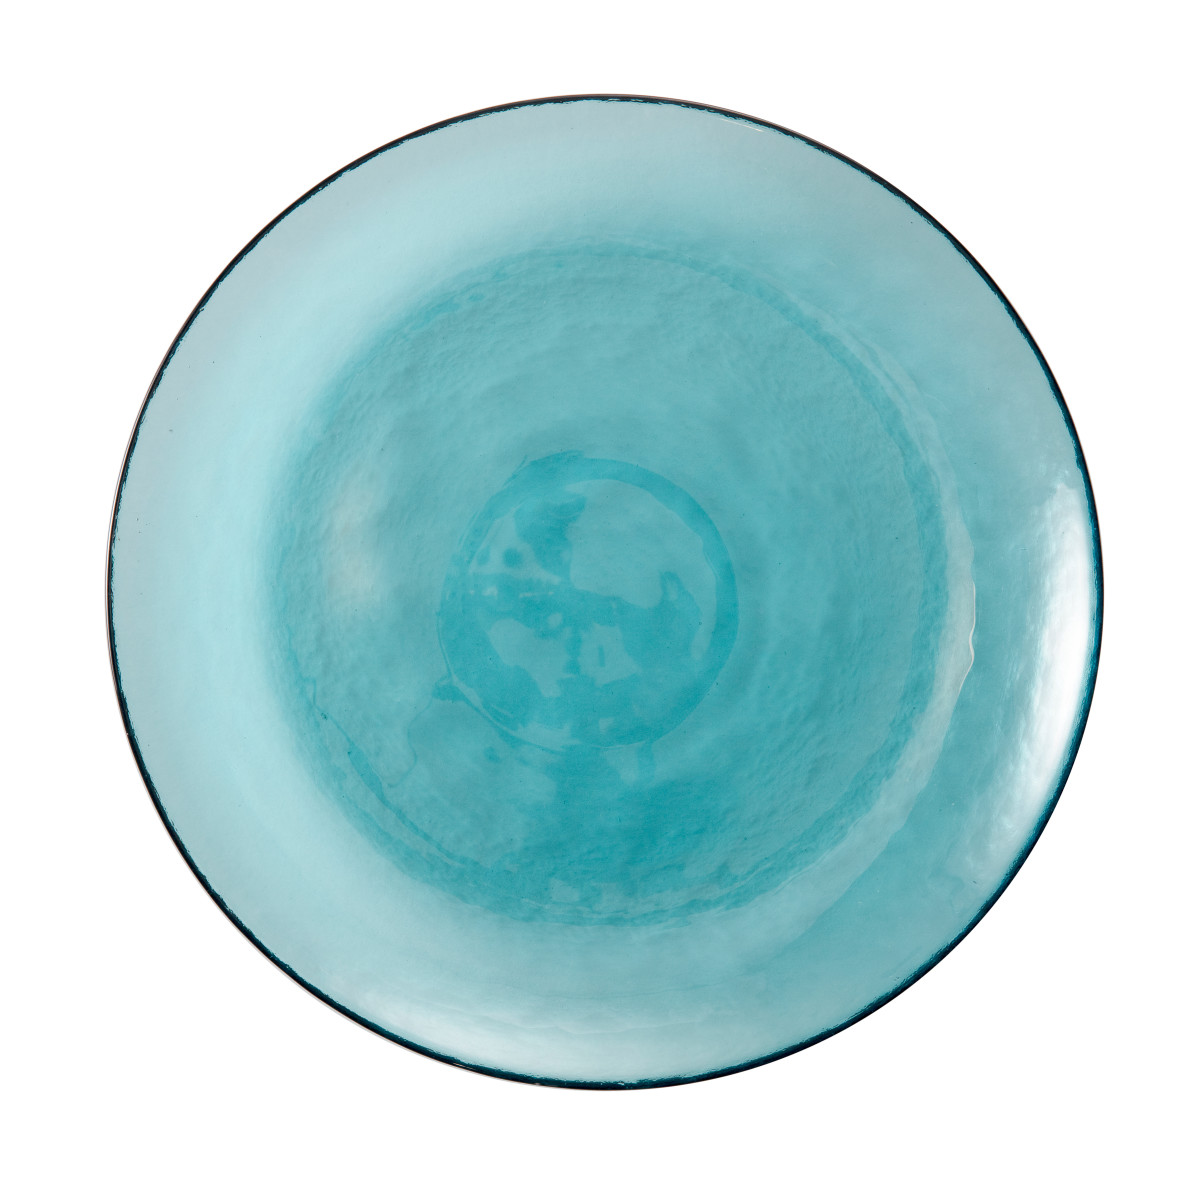 Los Cabos Lagoon Blue Dinner Plate 10.5"